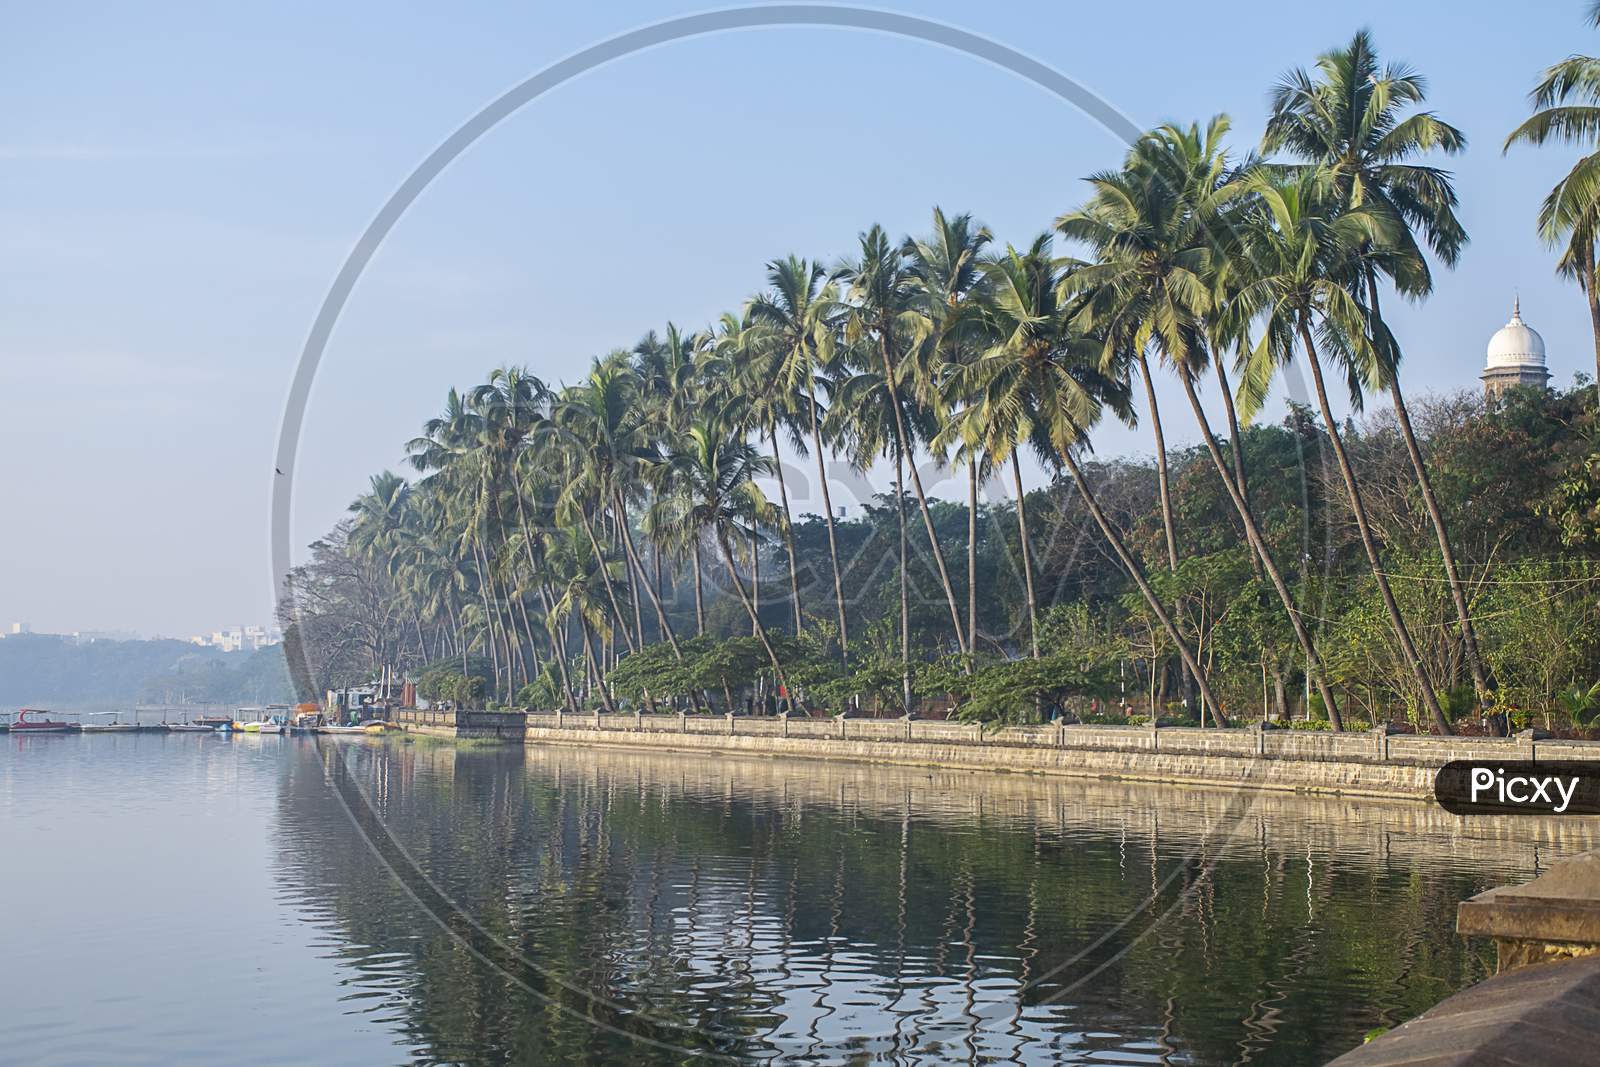 Stock Photo Of Beautiful Old Rankala Lake Surrounded By Coconut Trees And Reflected In Lake Water. Picture Captured Morning Of Winter Season At Kolhapur City Maharashtra India.